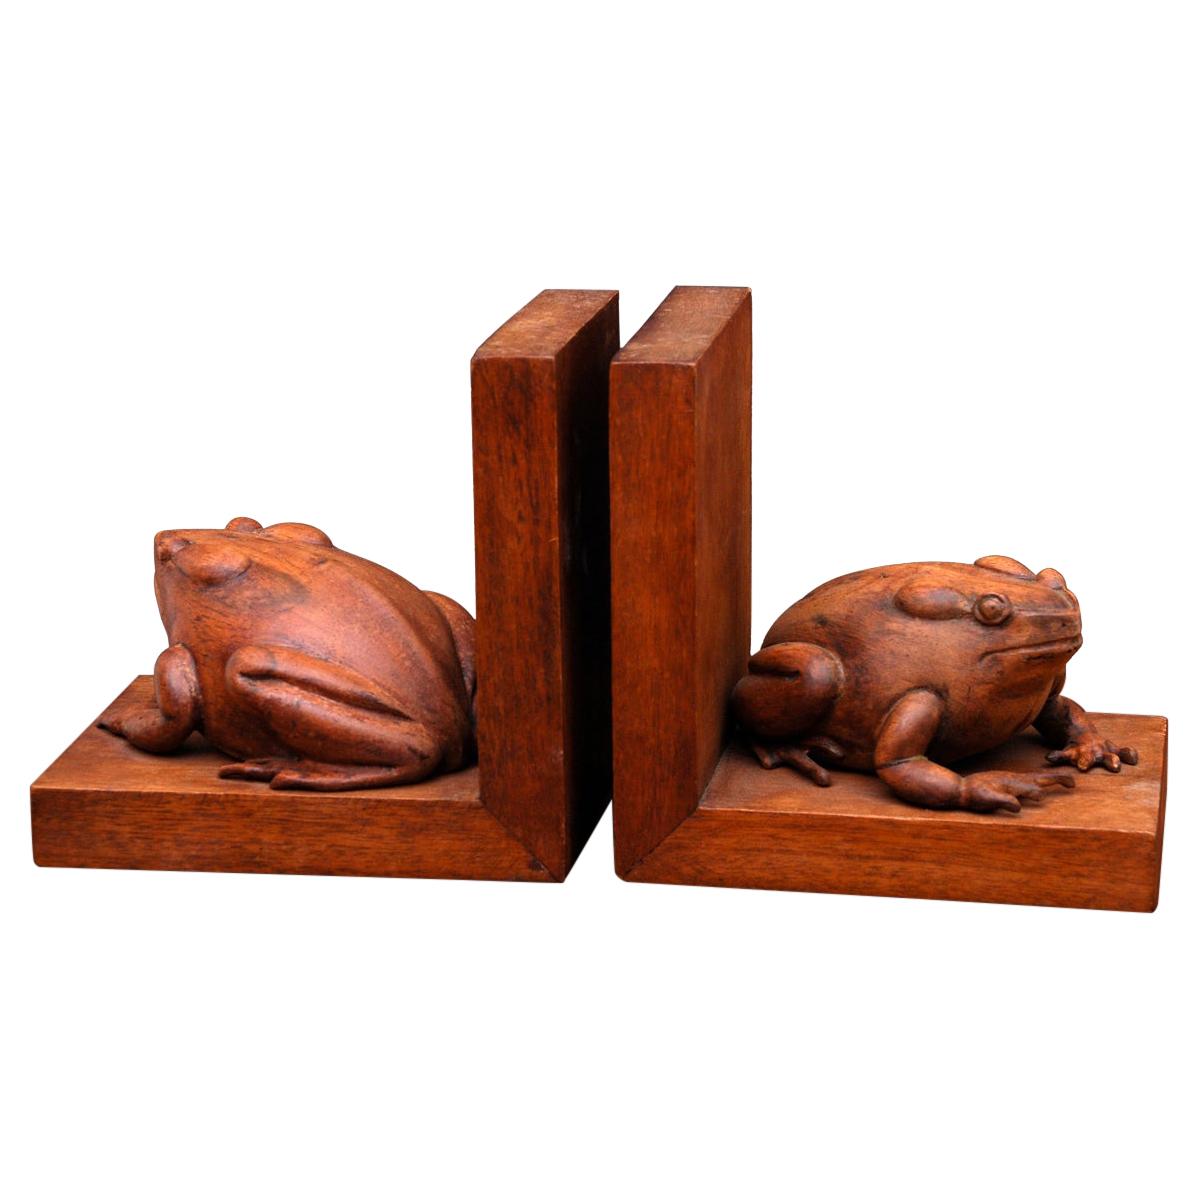 Art Deco Adorable Pair Frog Bookends Hand Carved in Solid Mahogany 1930s Mexico